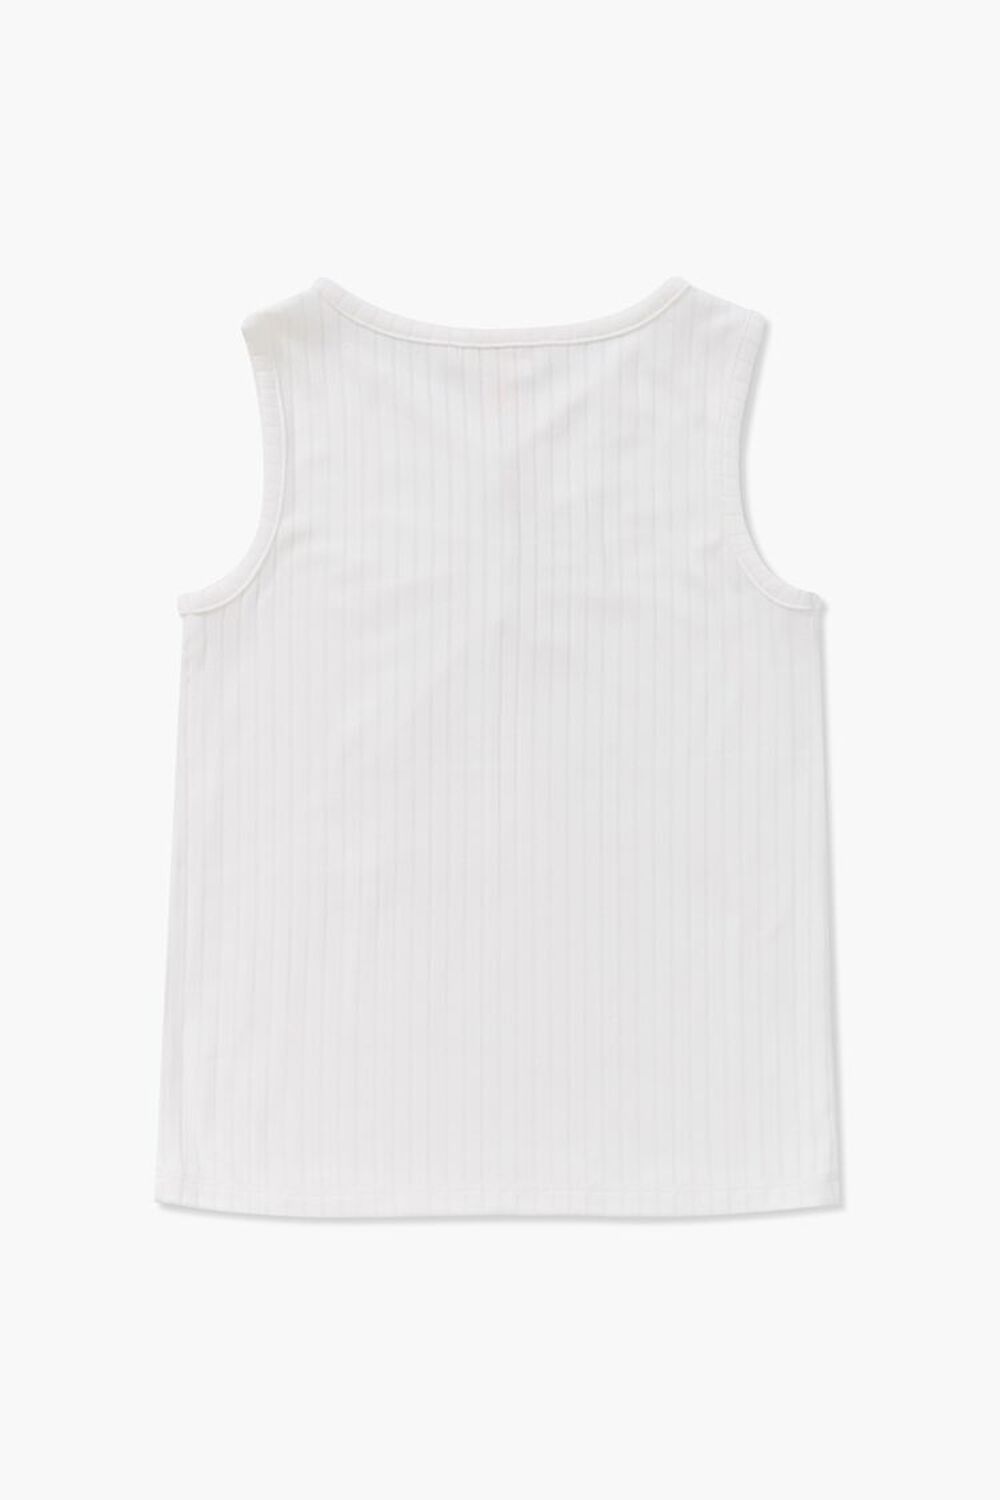 CREAM Girls Ribbed Ruched Tank Top (Kids), image 2